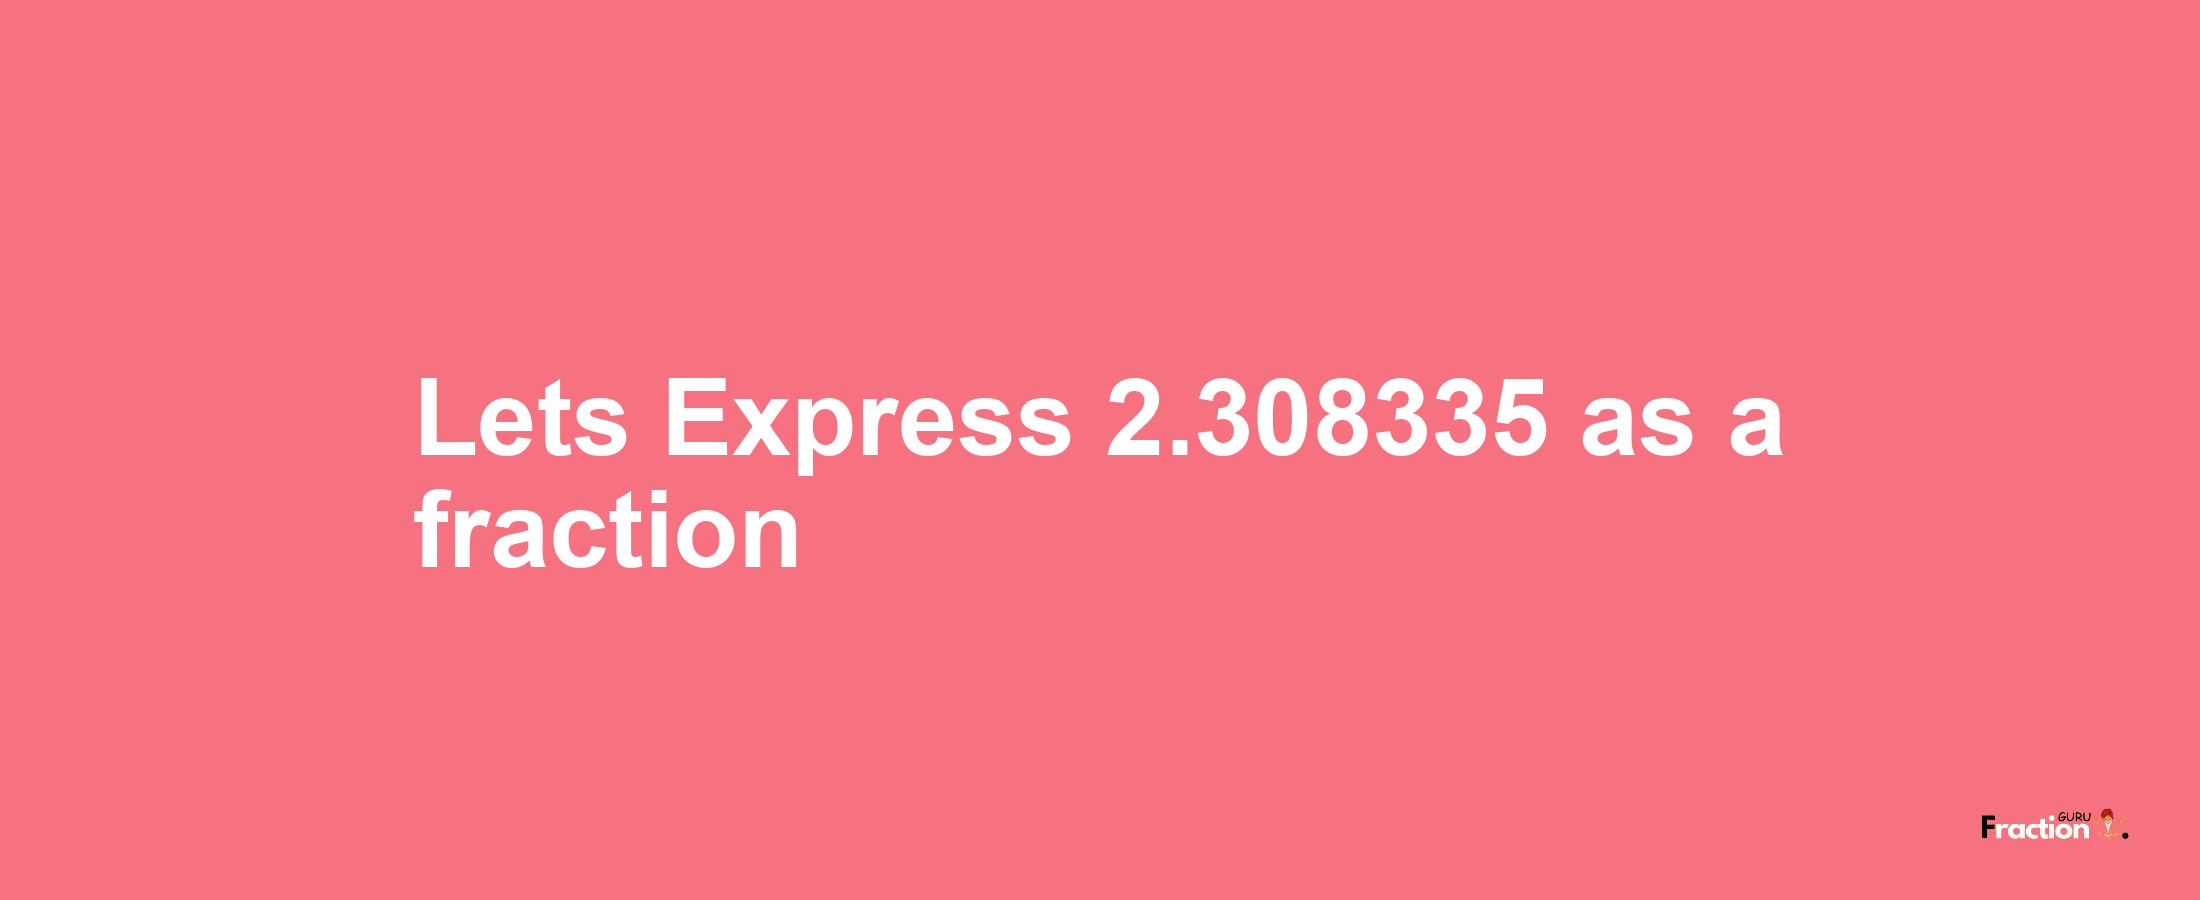 Lets Express 2.308335 as afraction